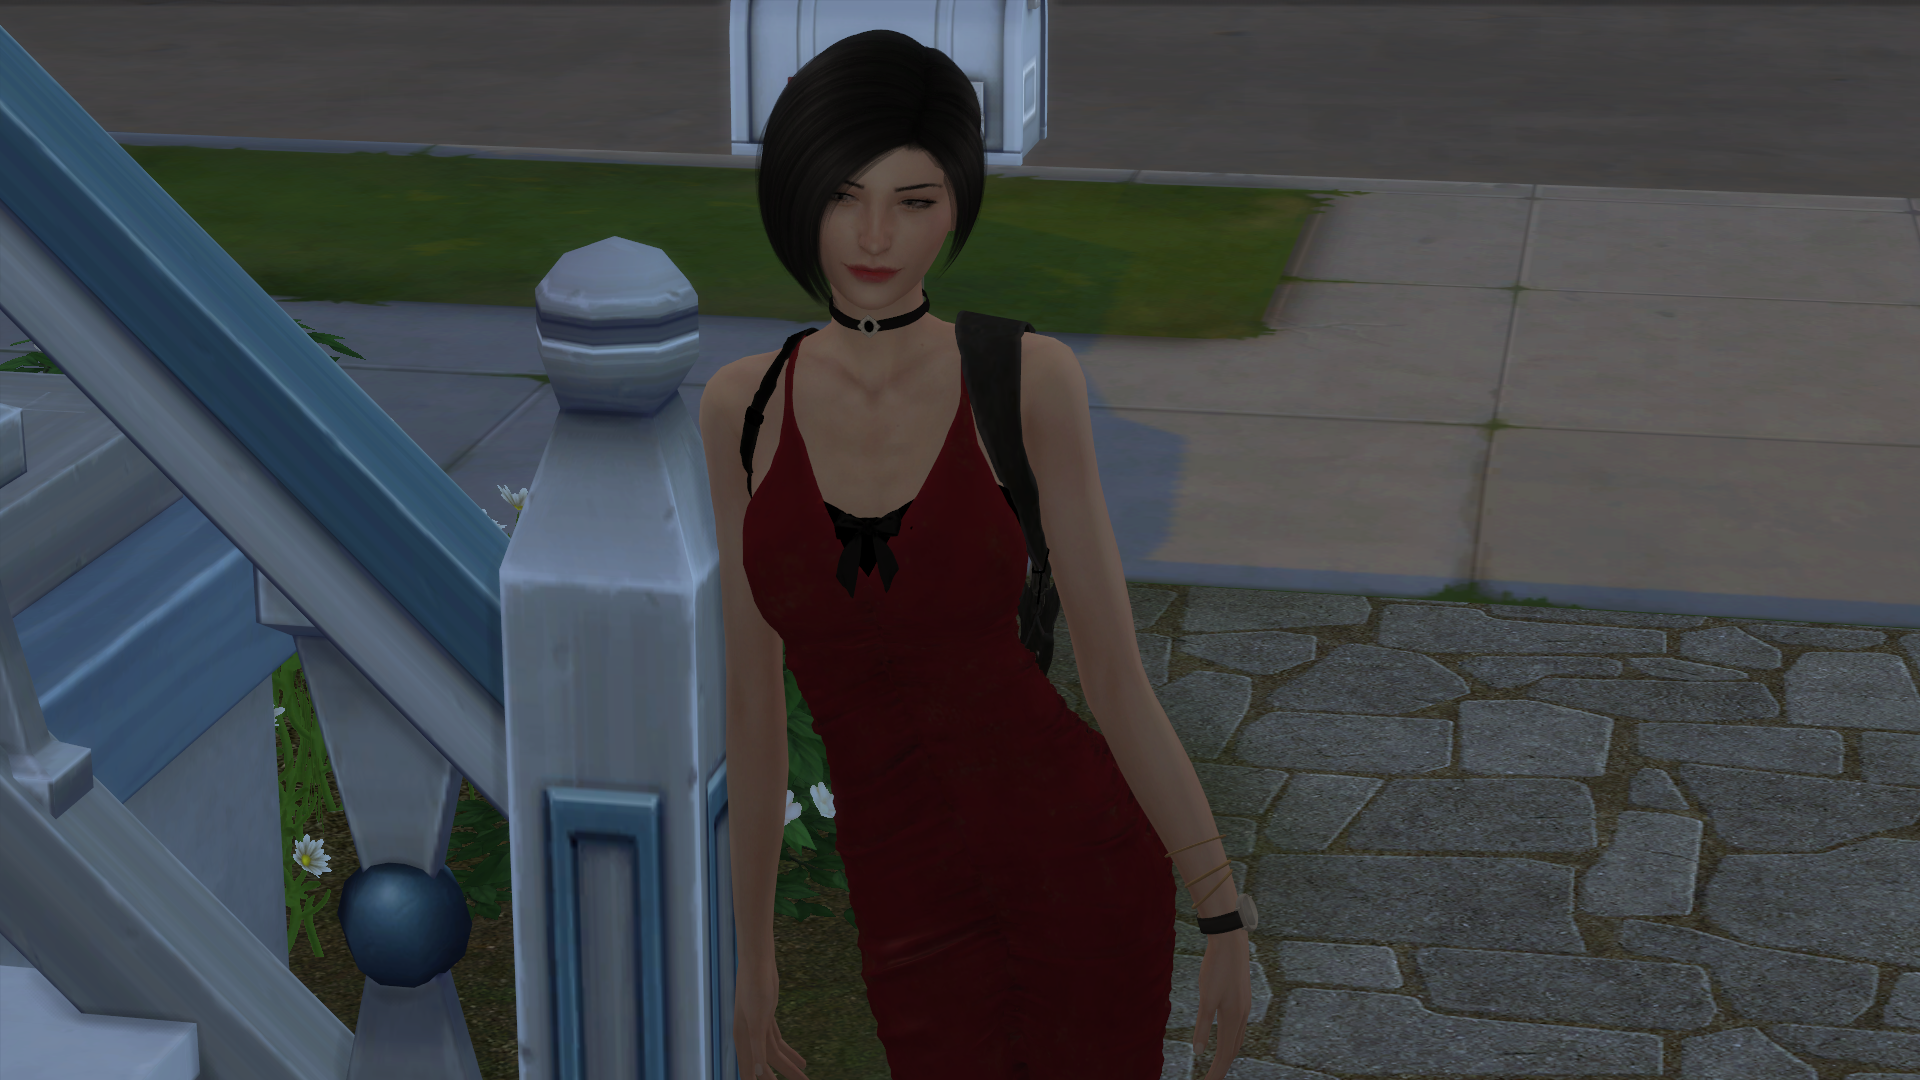 316604083_TheSims41_20_202110_17_19AM.png.36551081db503ba4694c03031bc651d7.png